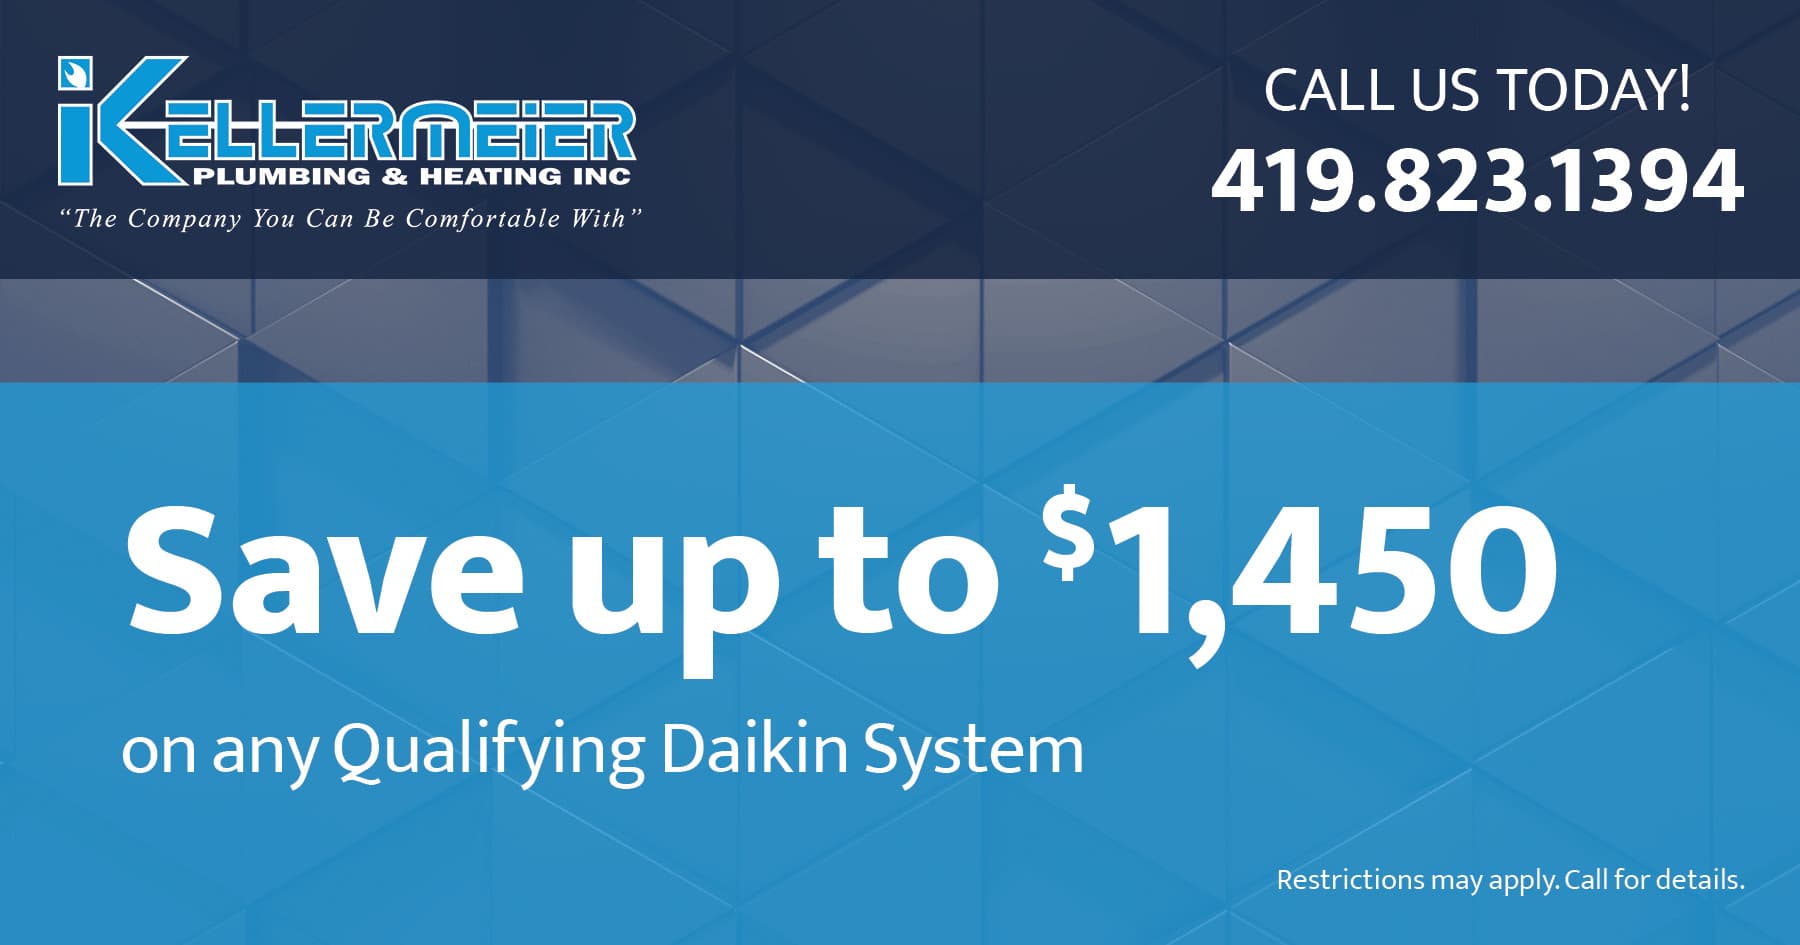 Save up to $1,450 on any Qualifying Daikin System. Coupon. Kellermeier.